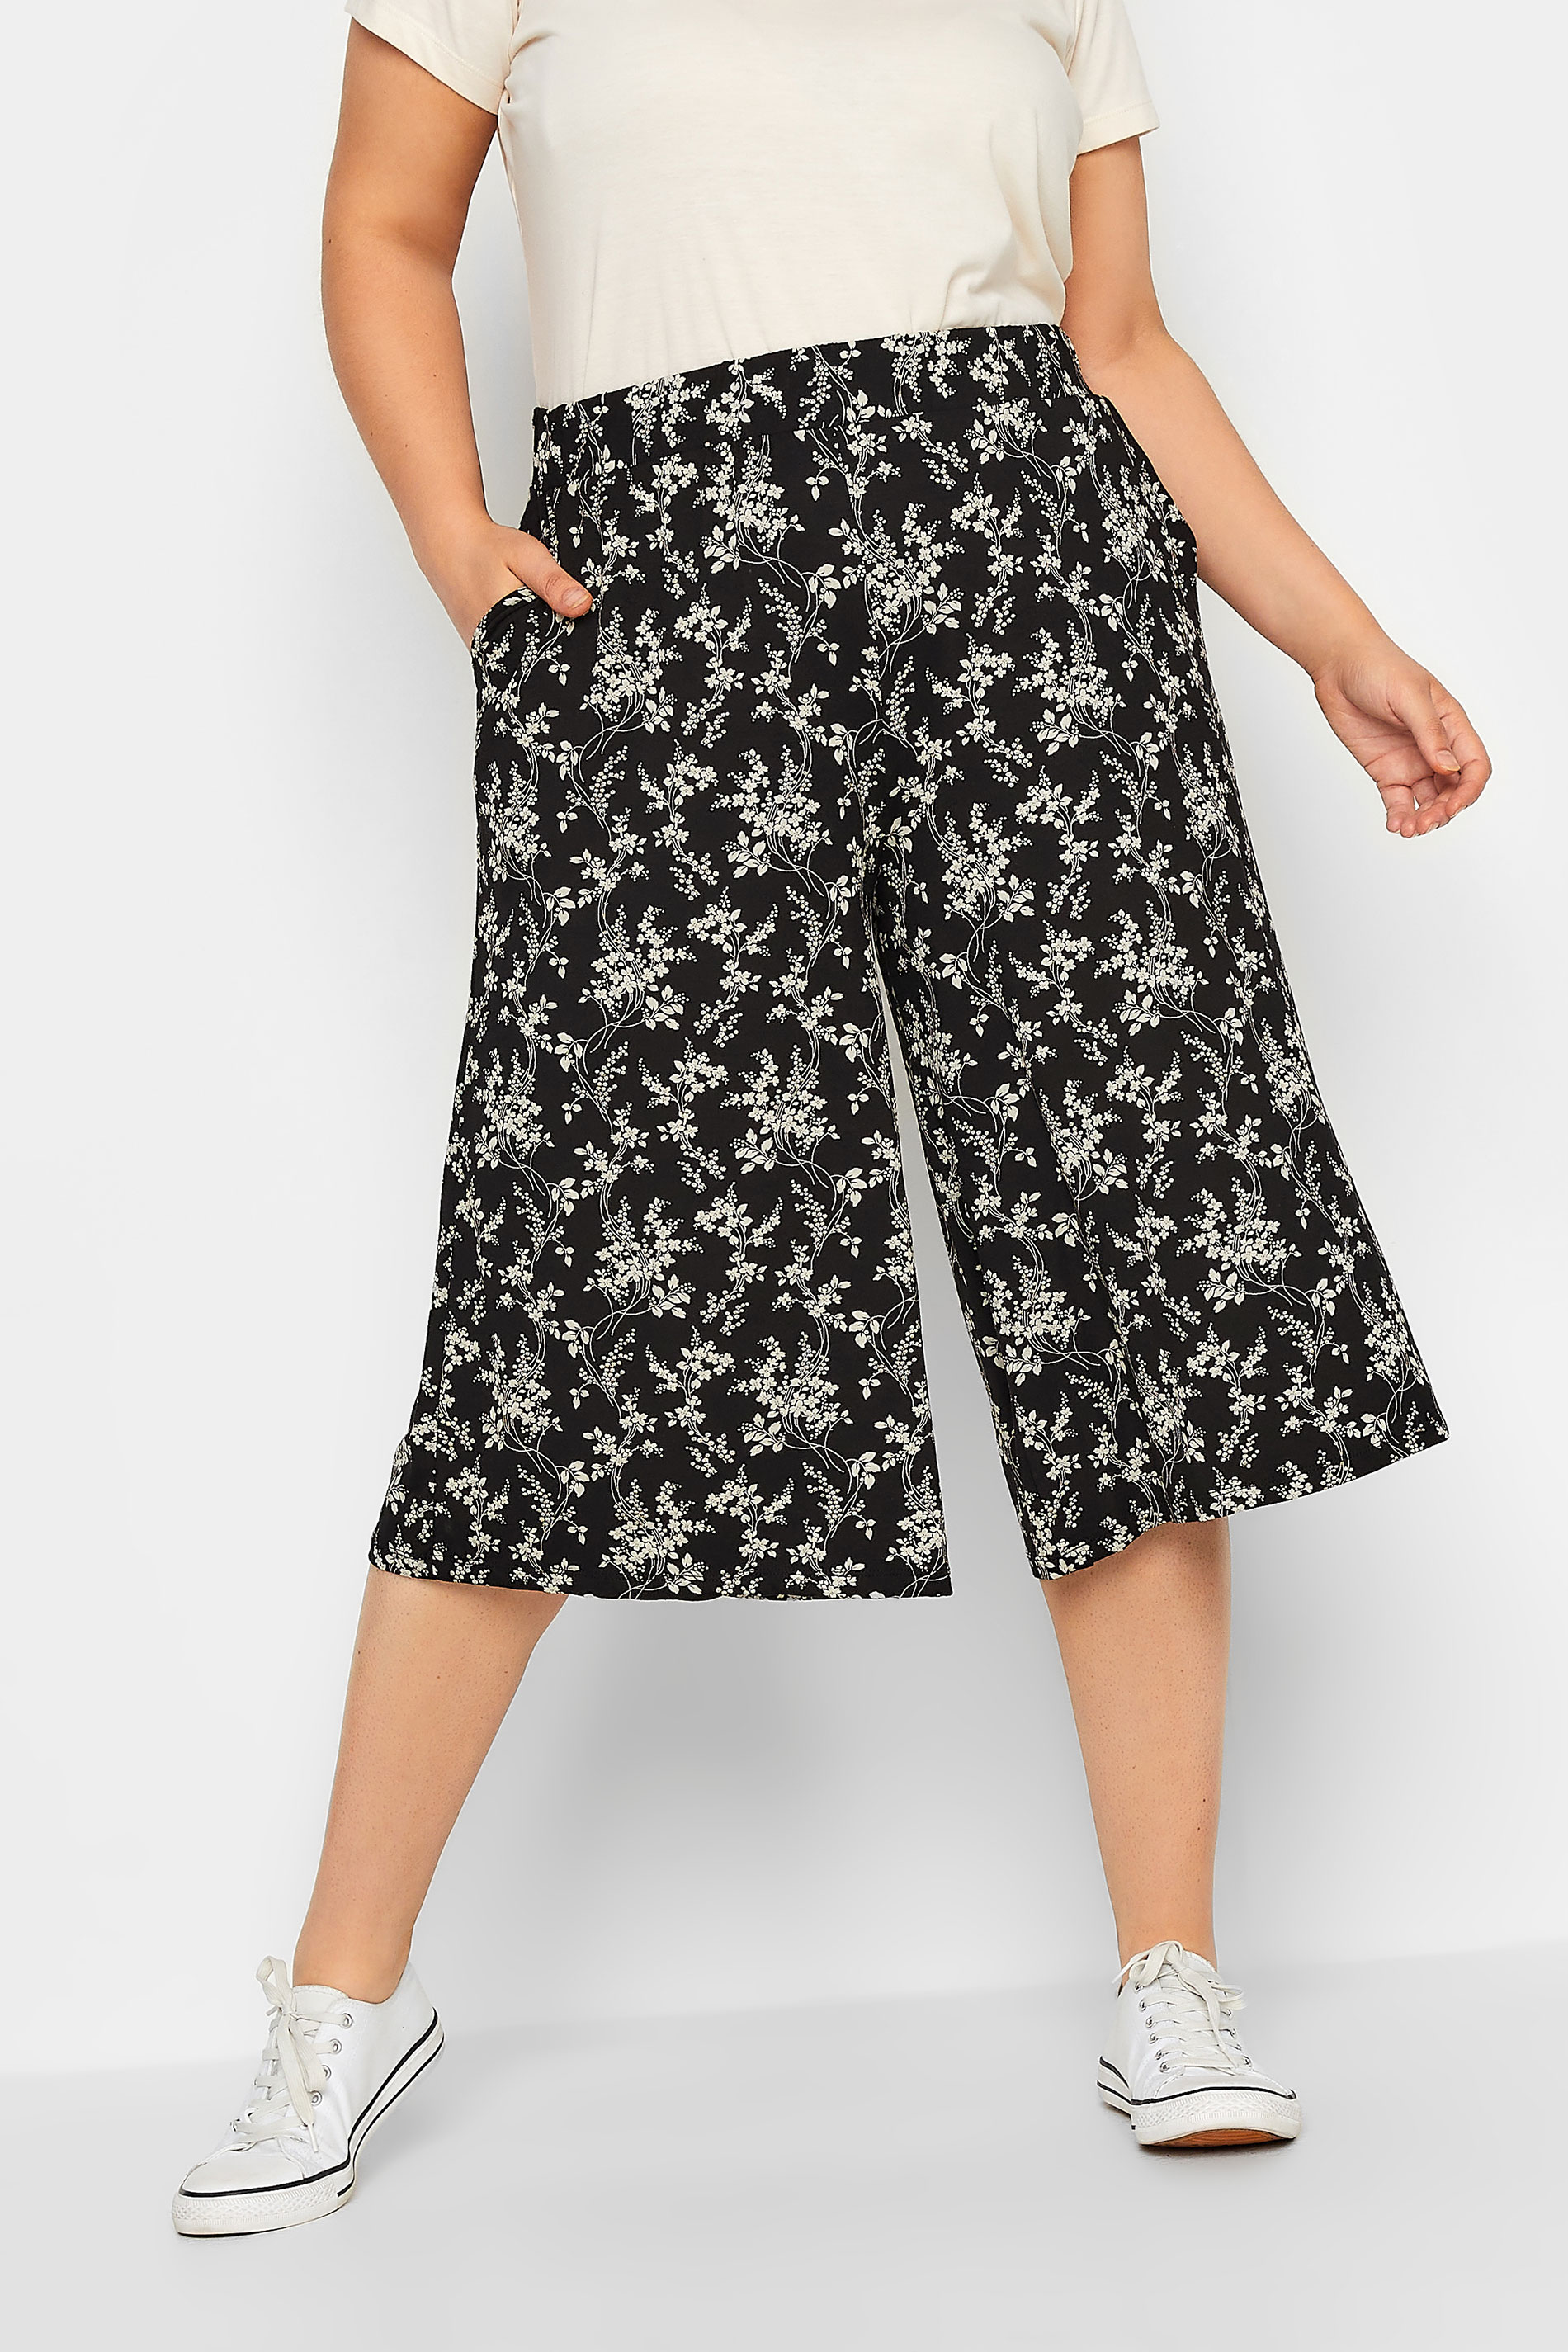 YOURS Curve Blue Mixed Floral Print Culotte | Yours Clothing 1